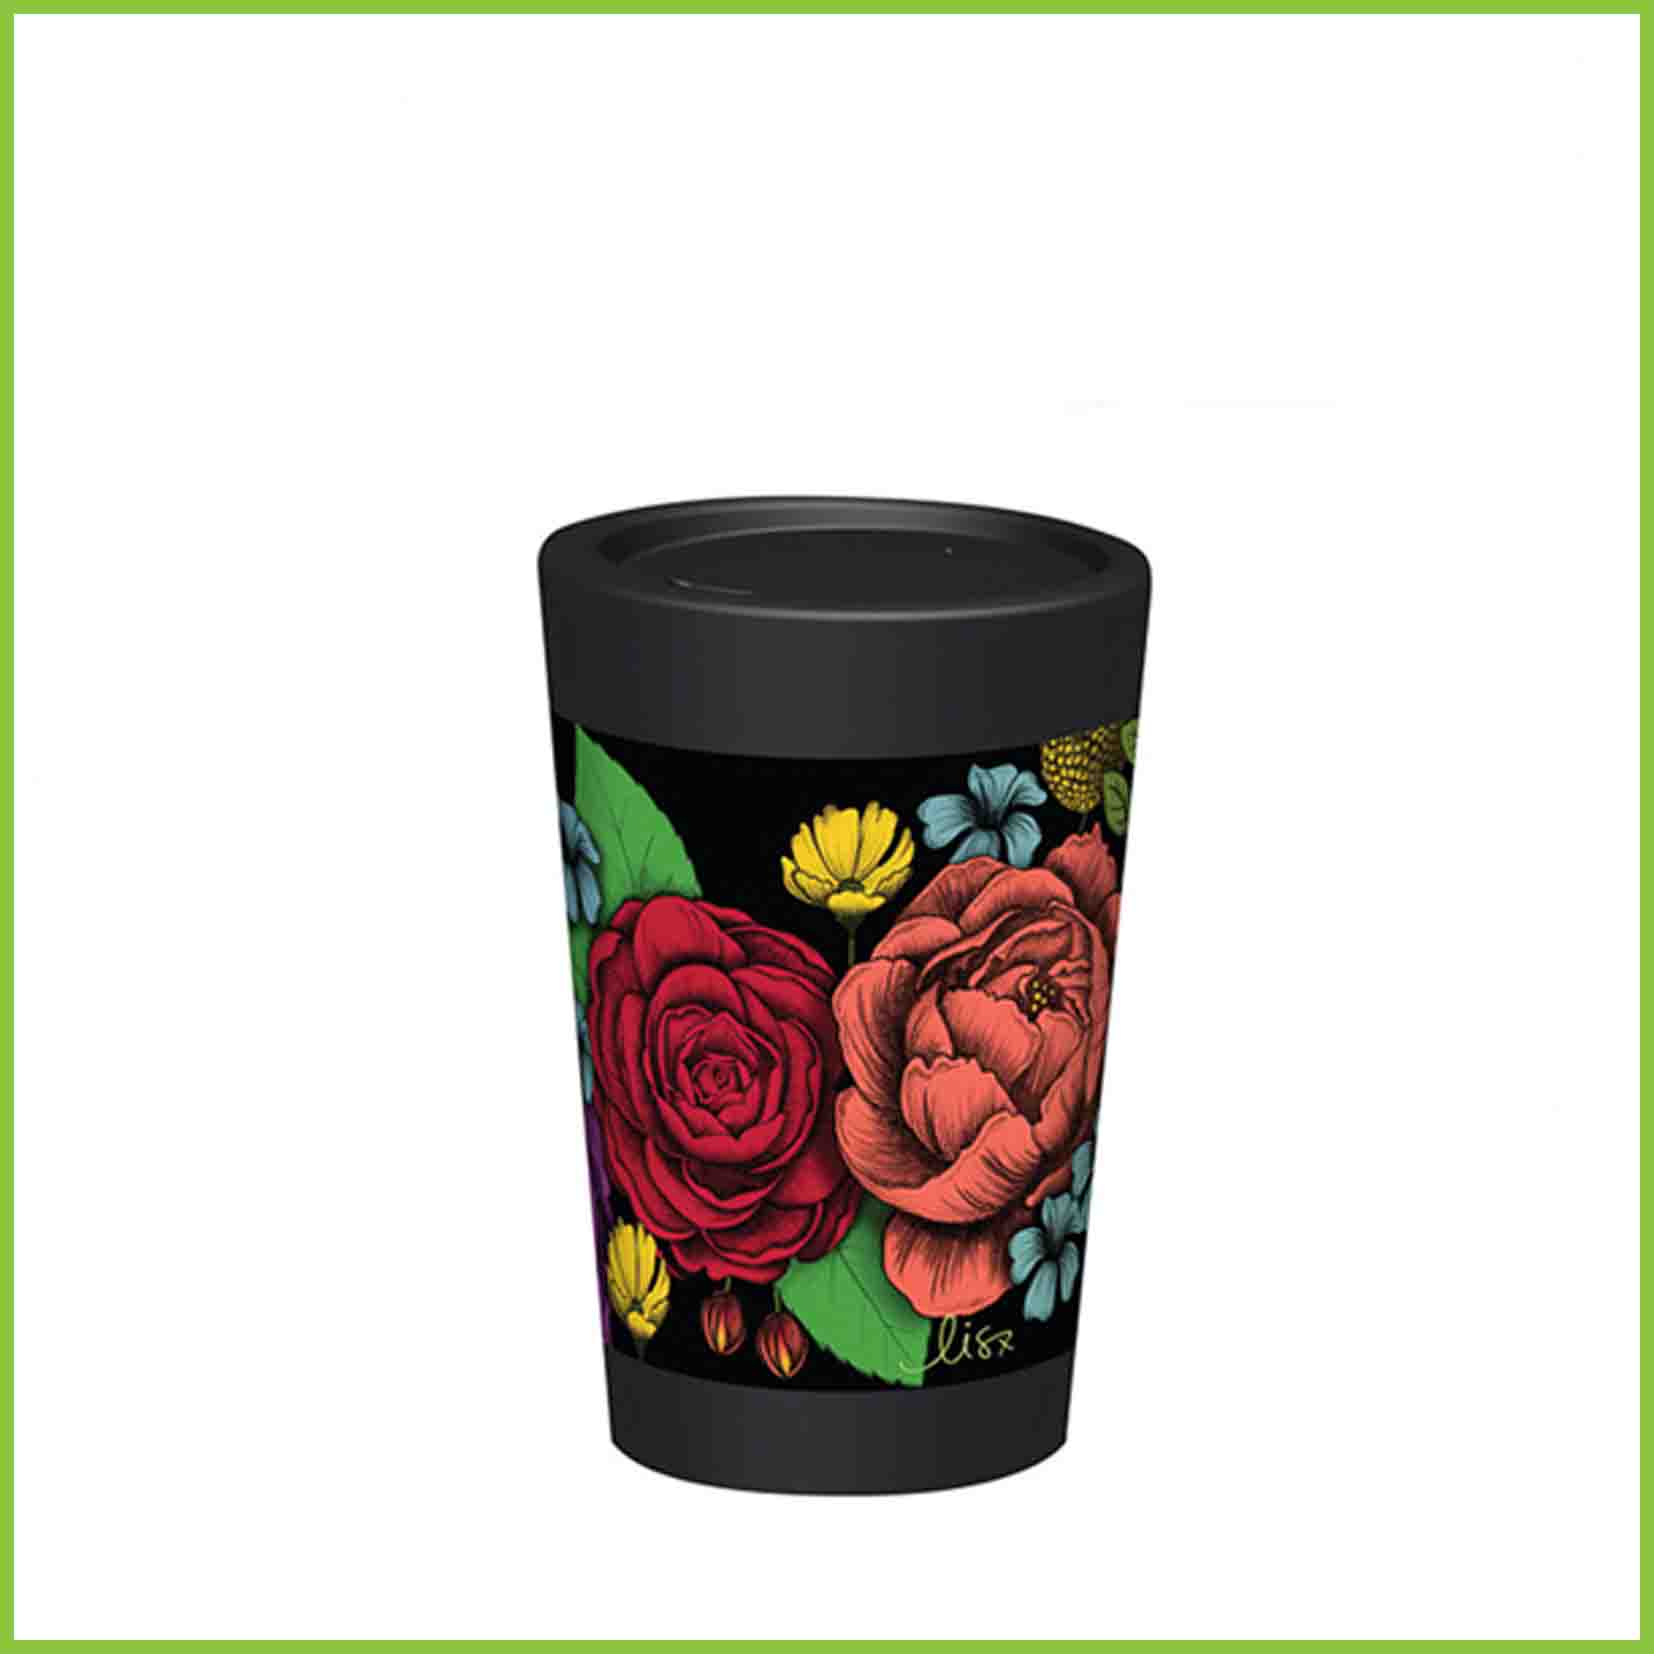 A lightweight reusable cup from CuppaCoffeeCup with a Roses design.